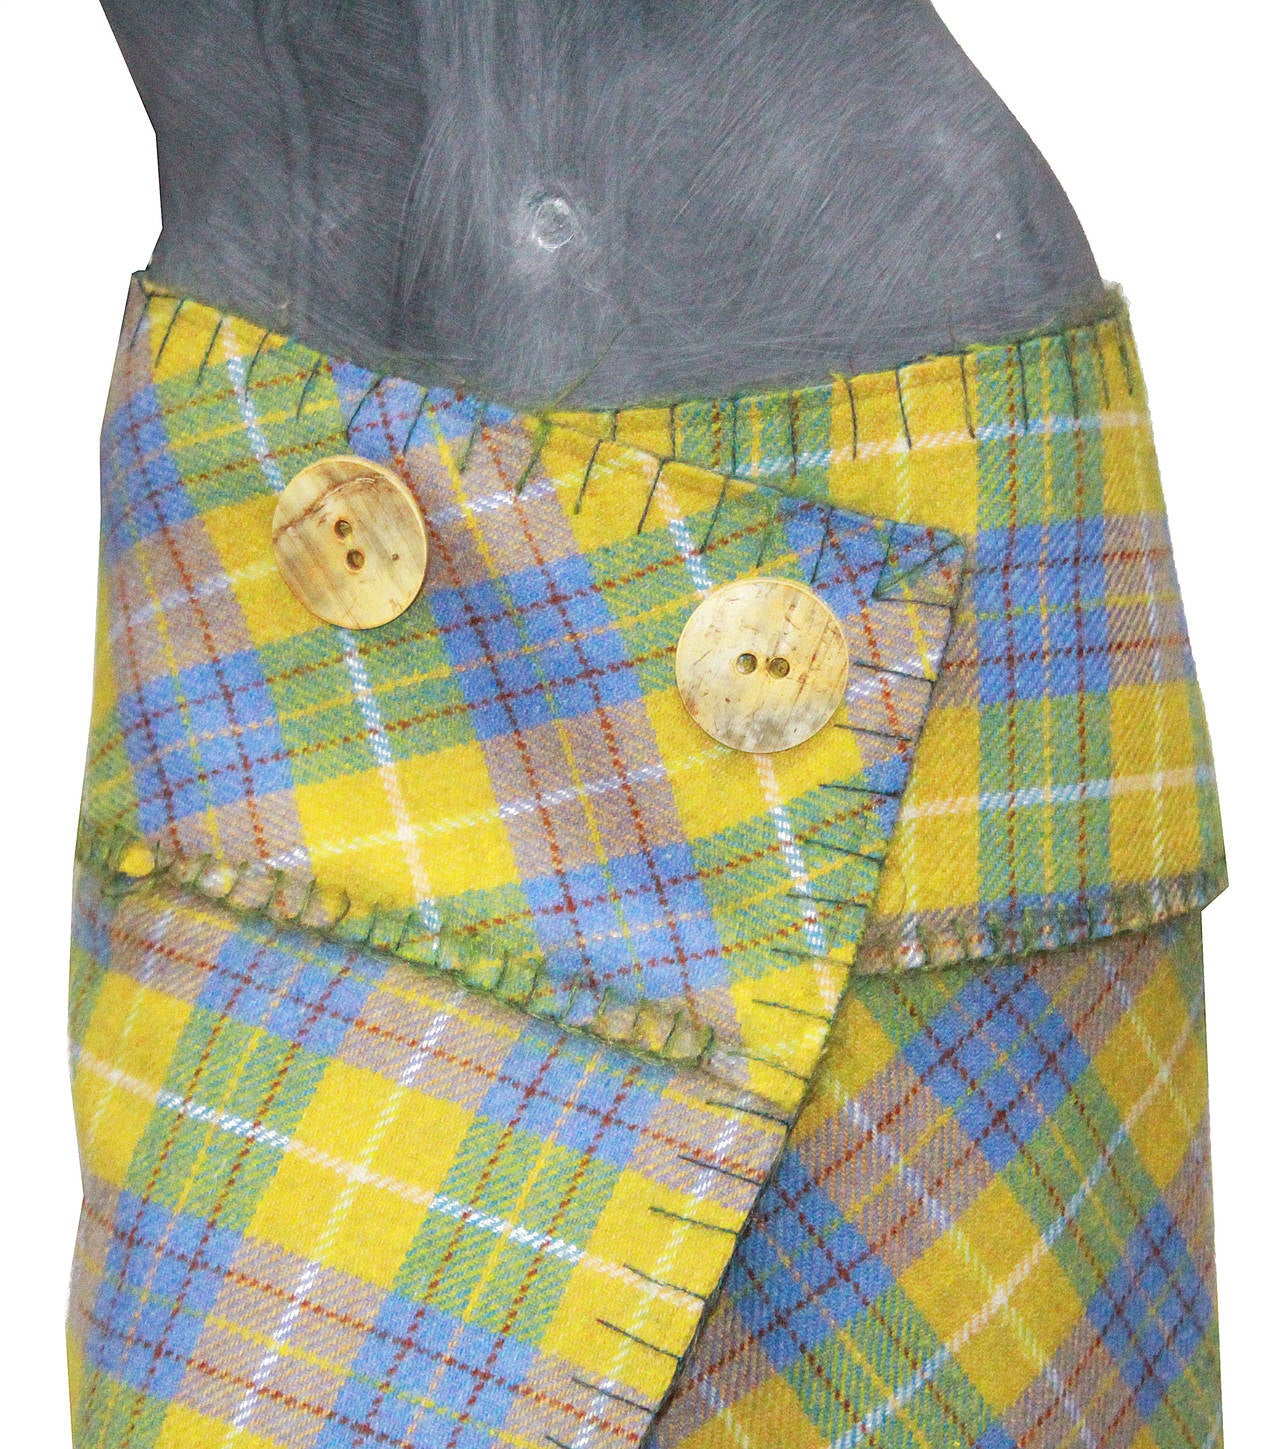 A Circa 1990s John Galliano plaid wrap skirt made from 100% wool, features to large shell buttons. 

styled with an Alexander McQueen plaid fringed jacket, also available at One of a Kind Archive. 

Fr 40 (However fits a size 36-38 nicely on the